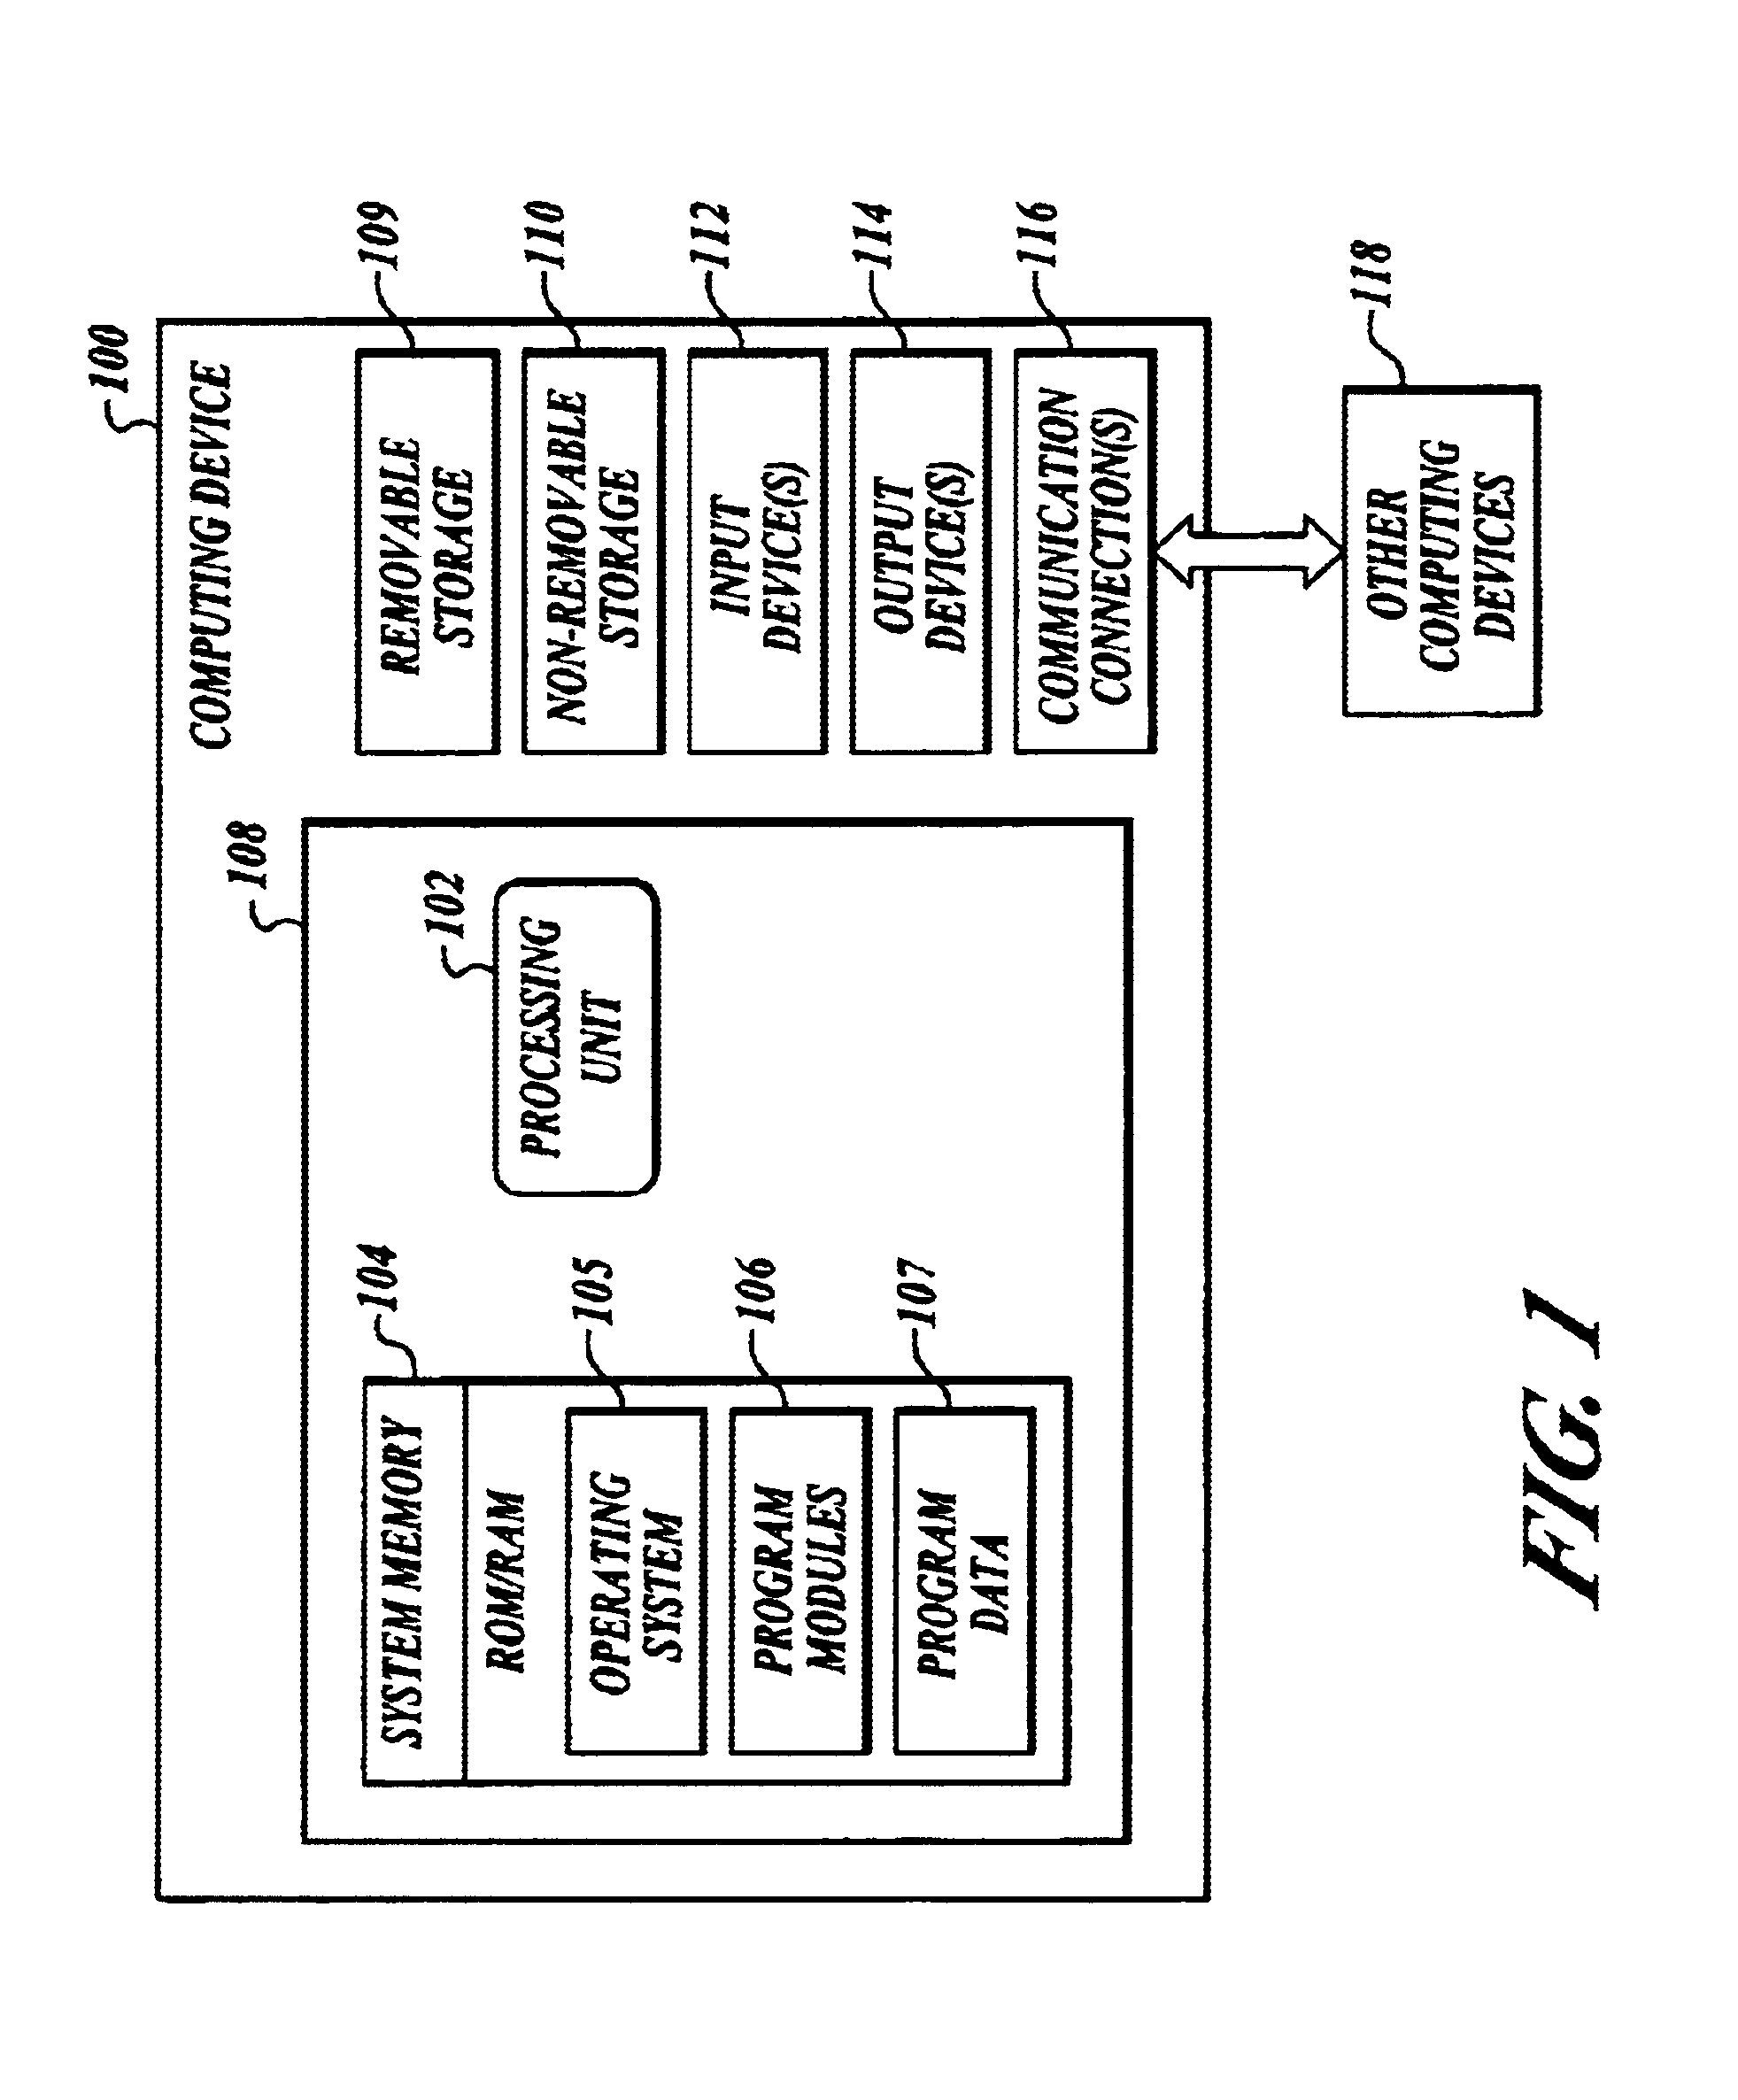 System and method for replicating data in resource sets